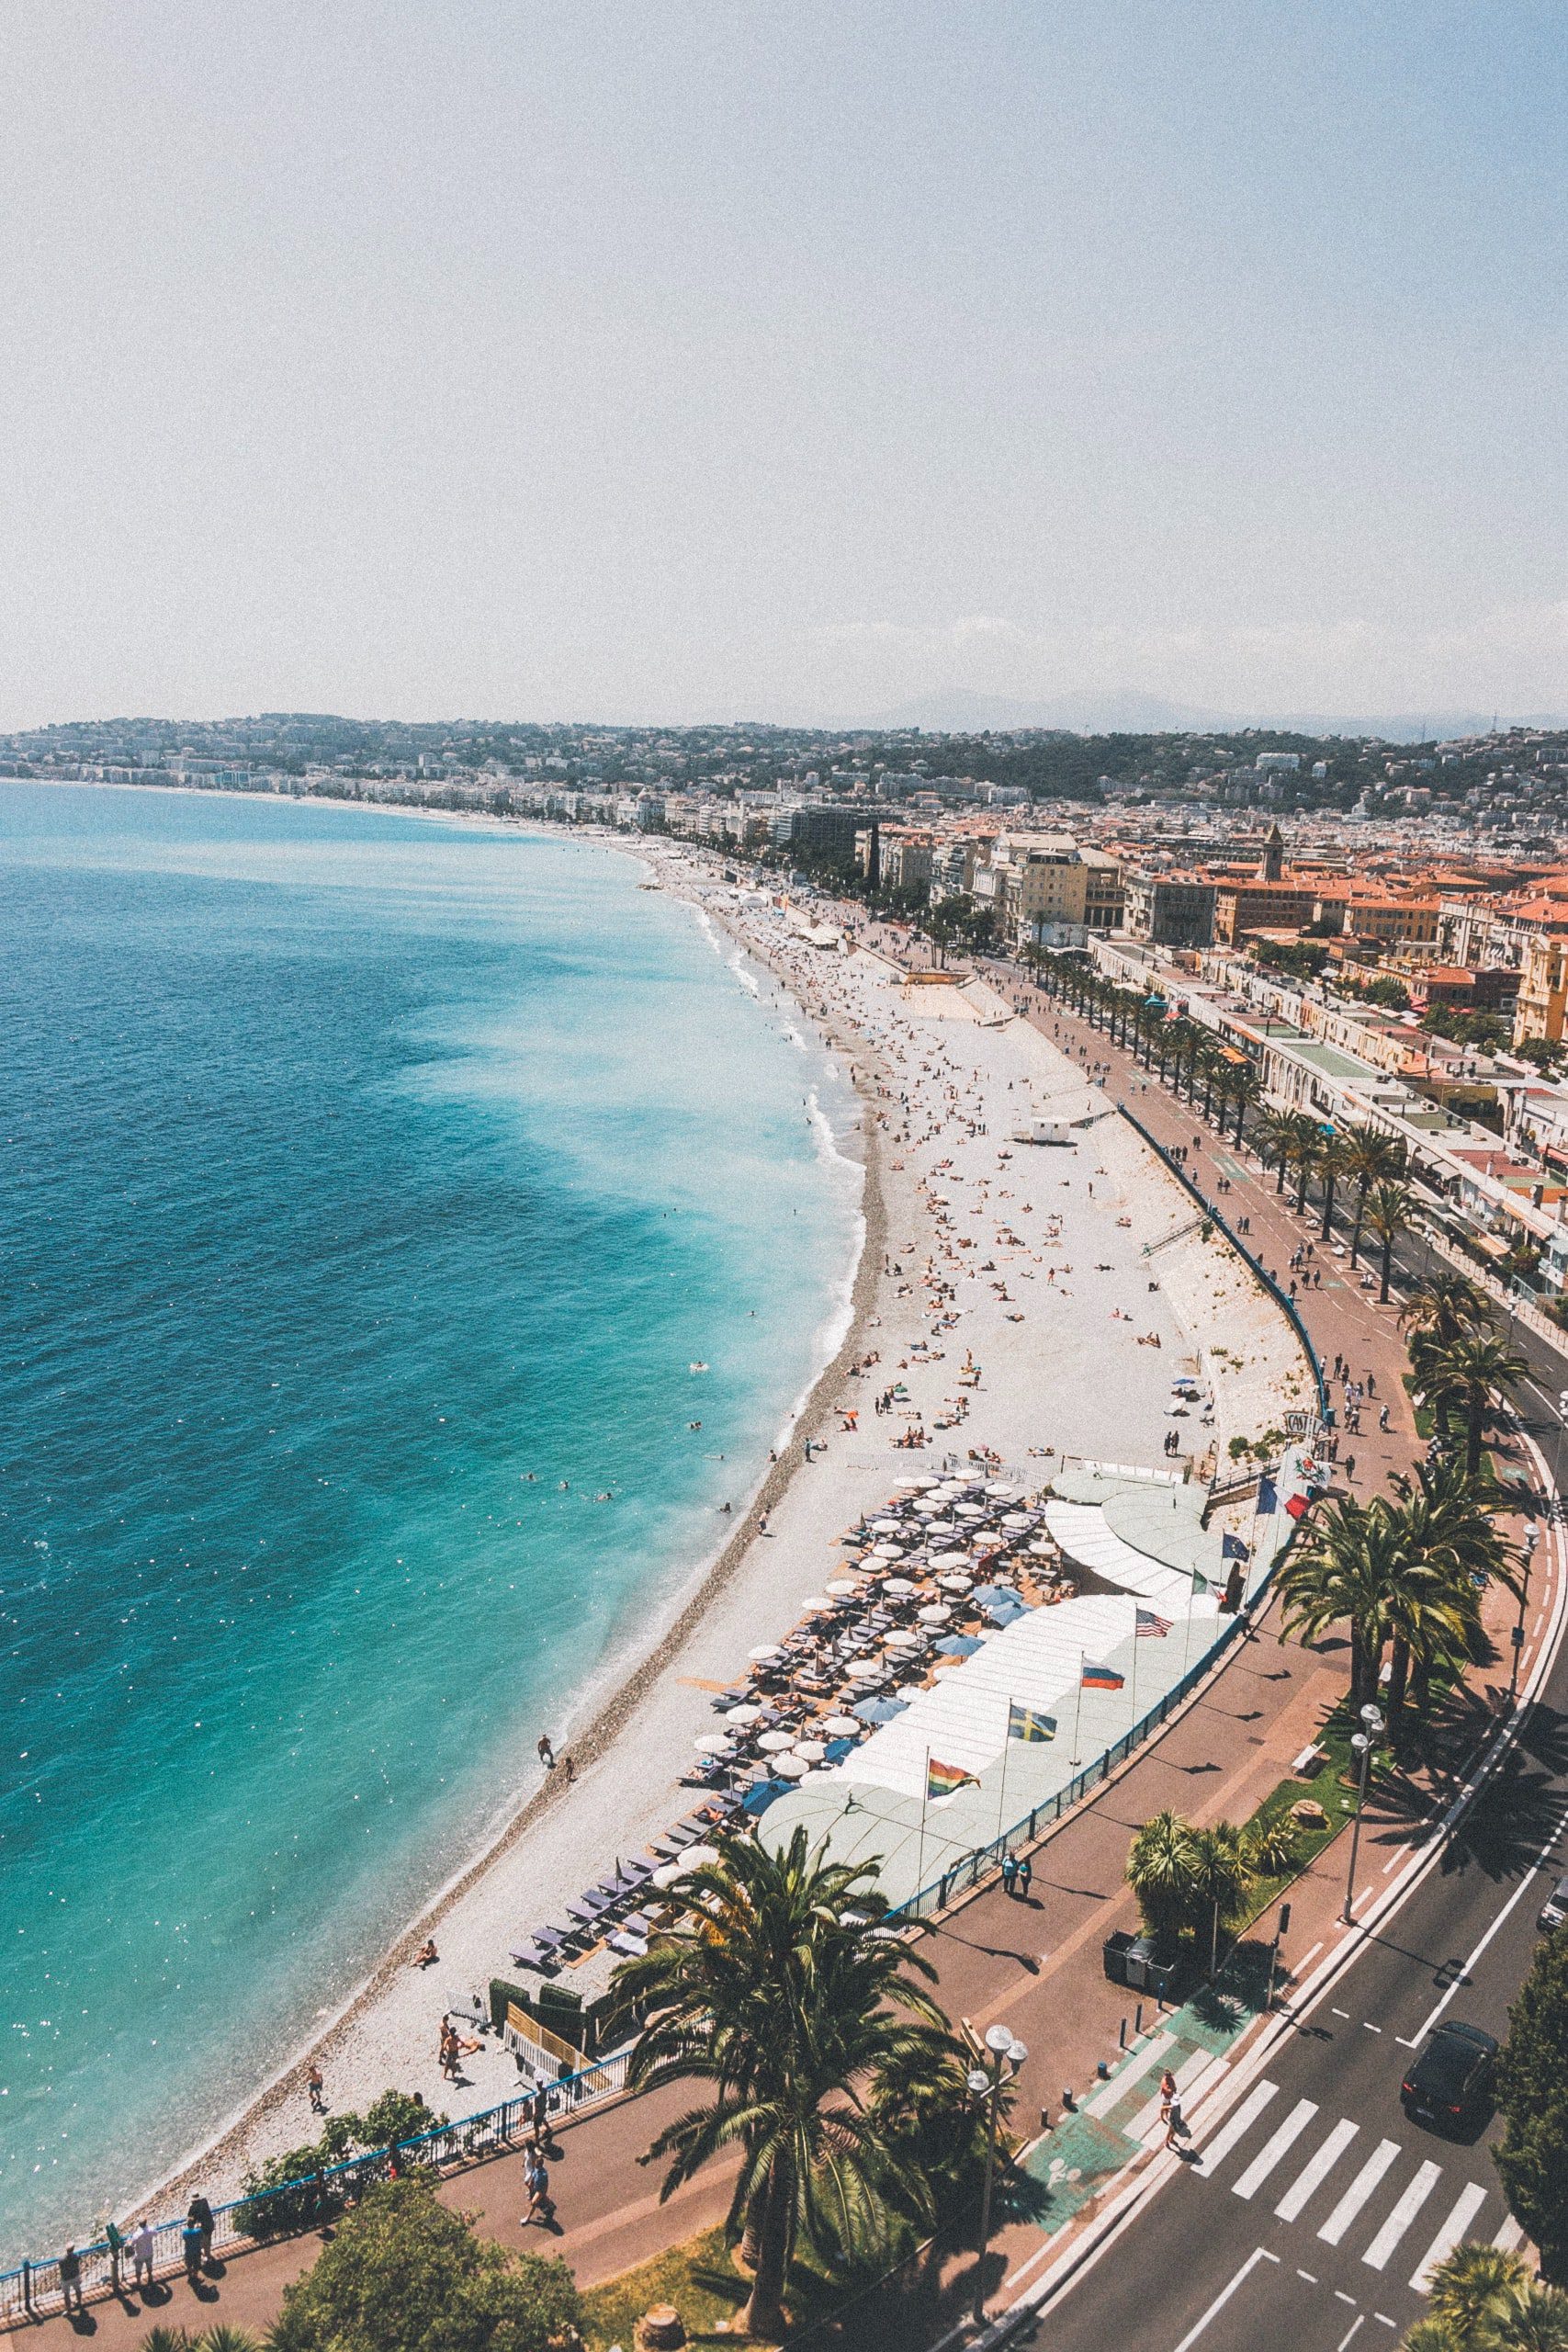 Most Instagrammable Places in Nice, France